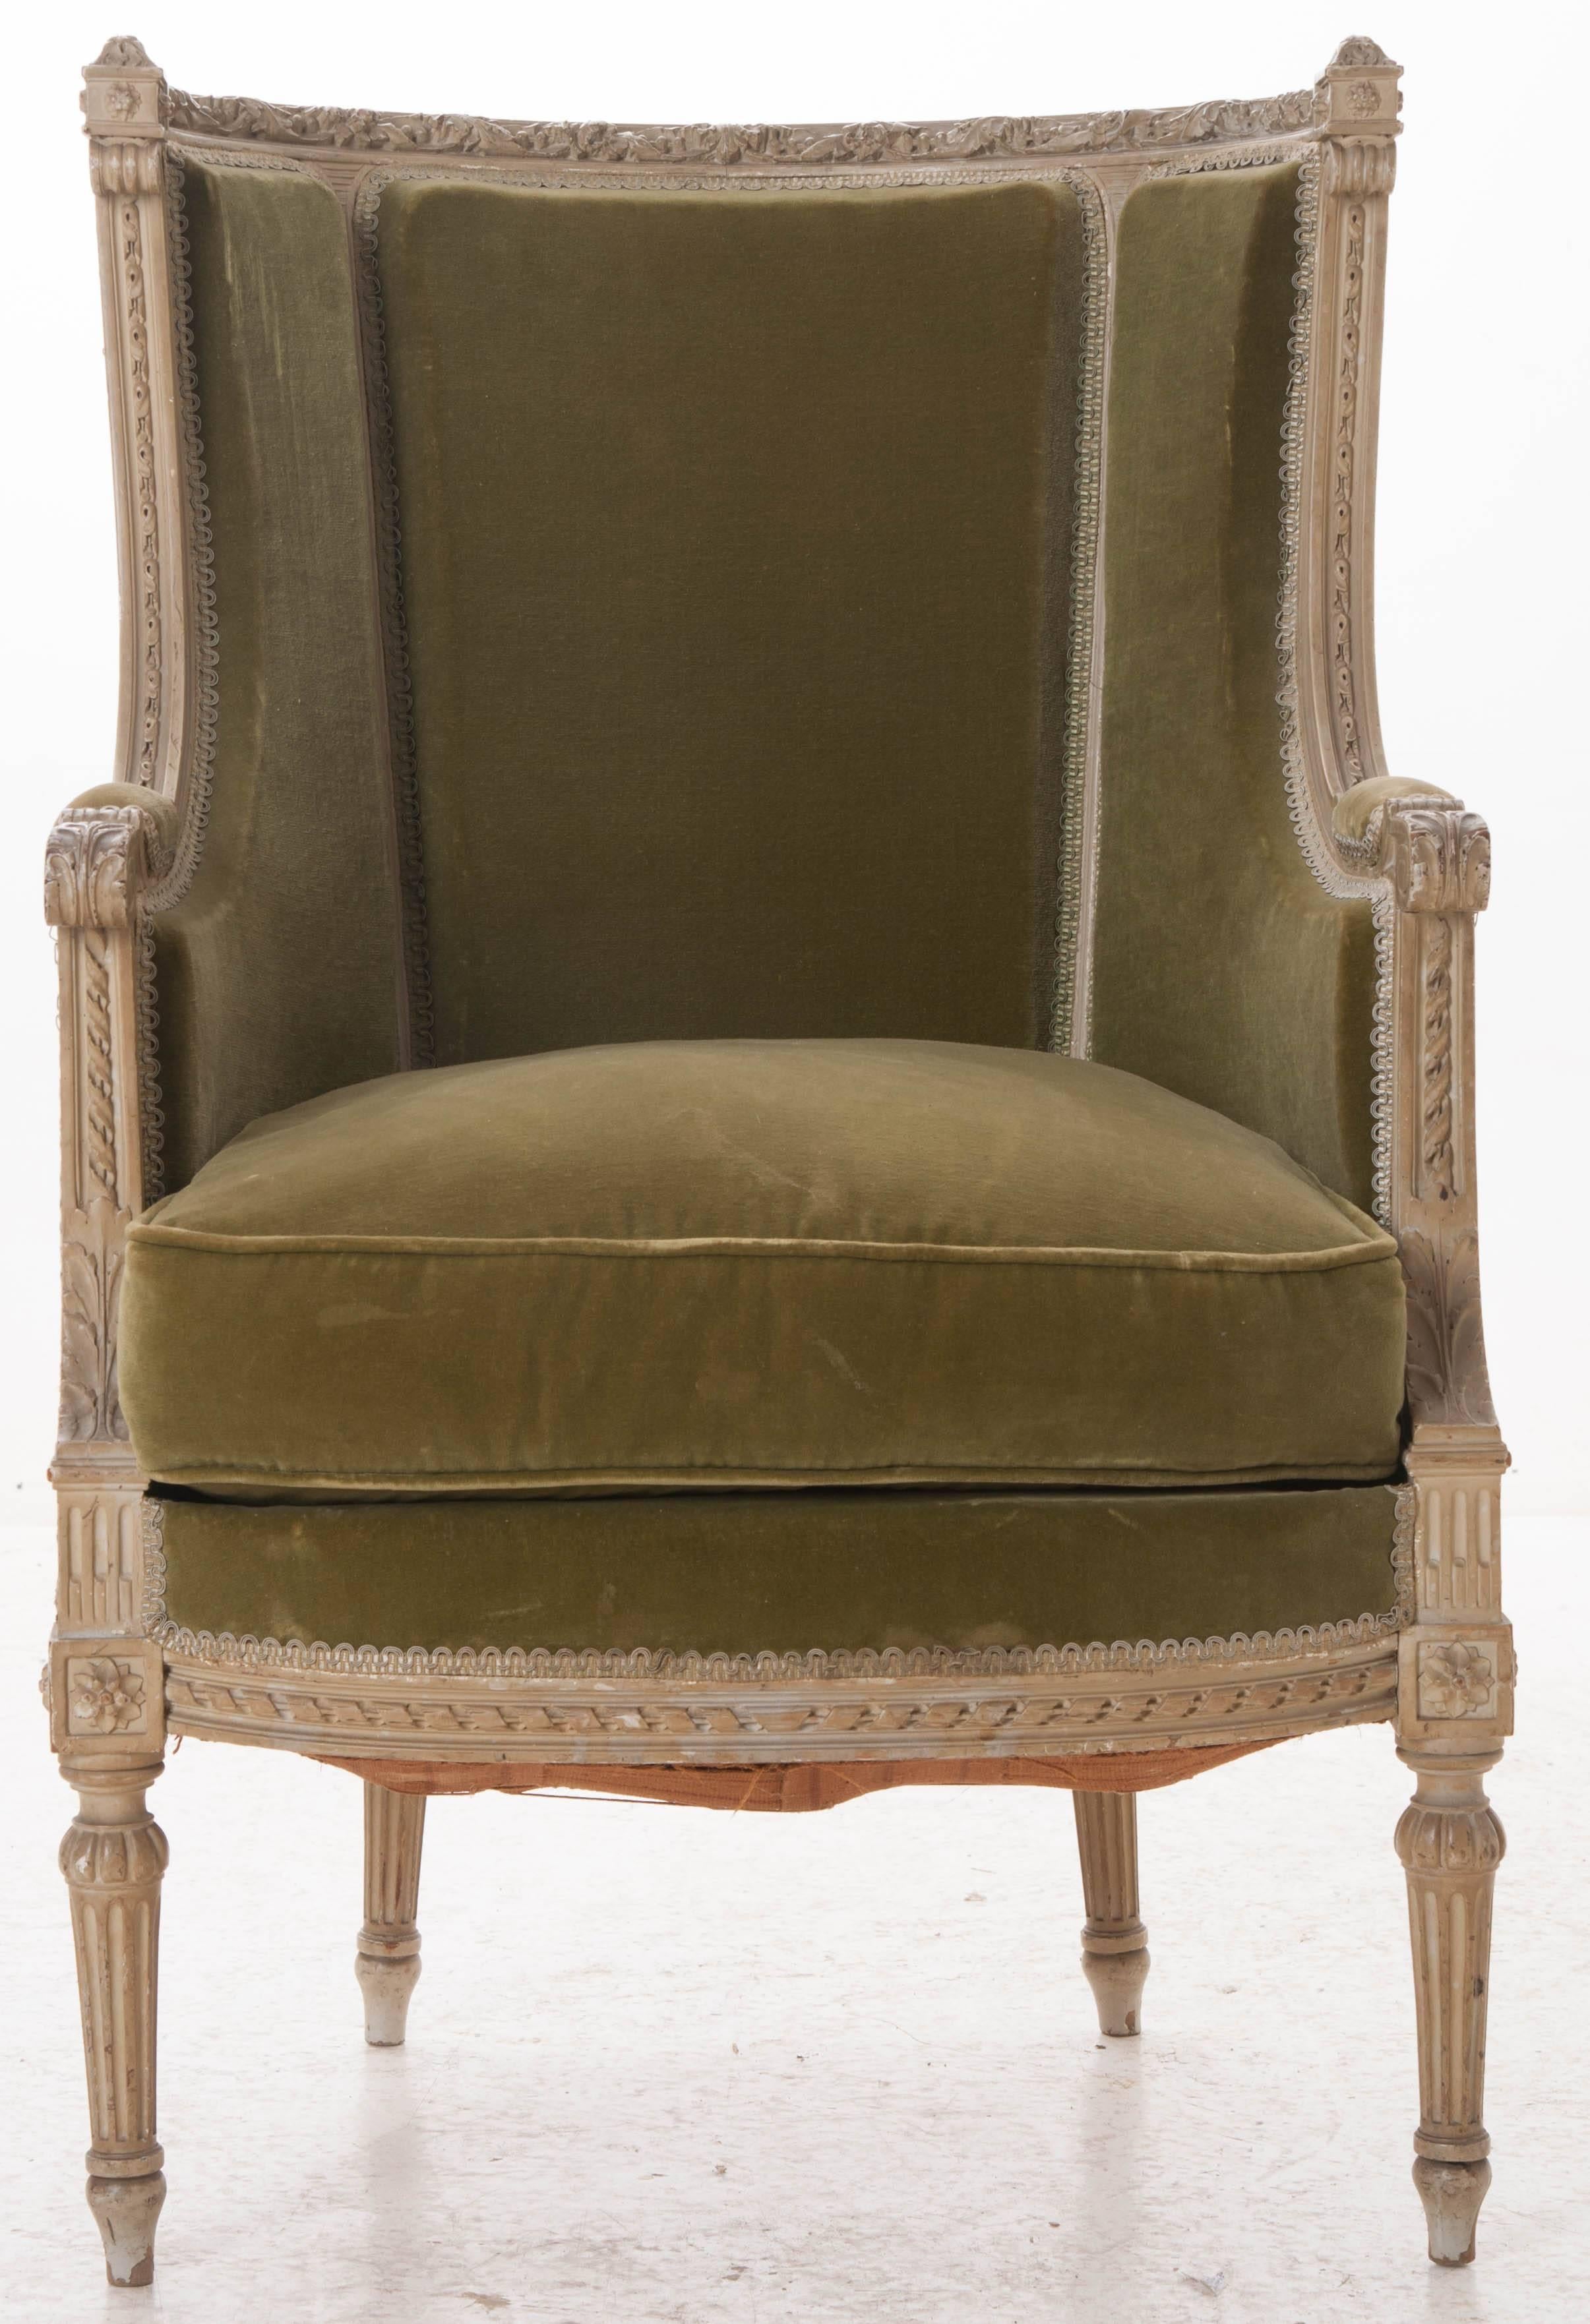 A masterfully carved 19th century Louis XVI painted bergère from France. Nearly every exposed surface of this chair's frame is embellished with fantastic detailed carvings. The top rail of this barrel backed piece is carved in a twisted garland